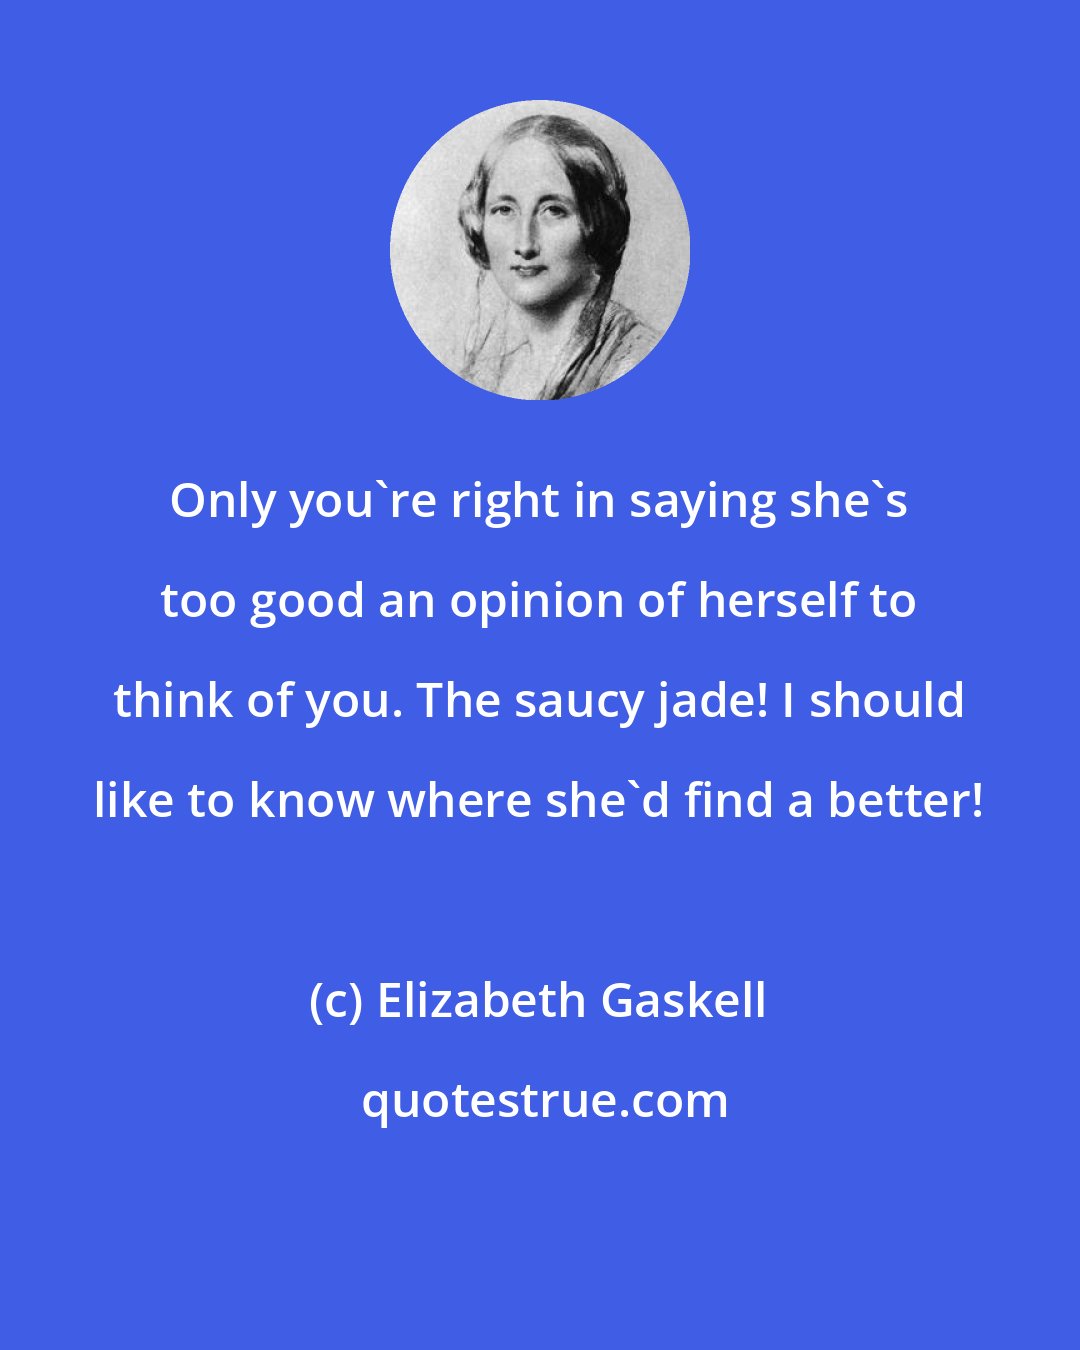 Elizabeth Gaskell: Only you're right in saying she's too good an opinion of herself to think of you. The saucy jade! I should like to know where she'd find a better!